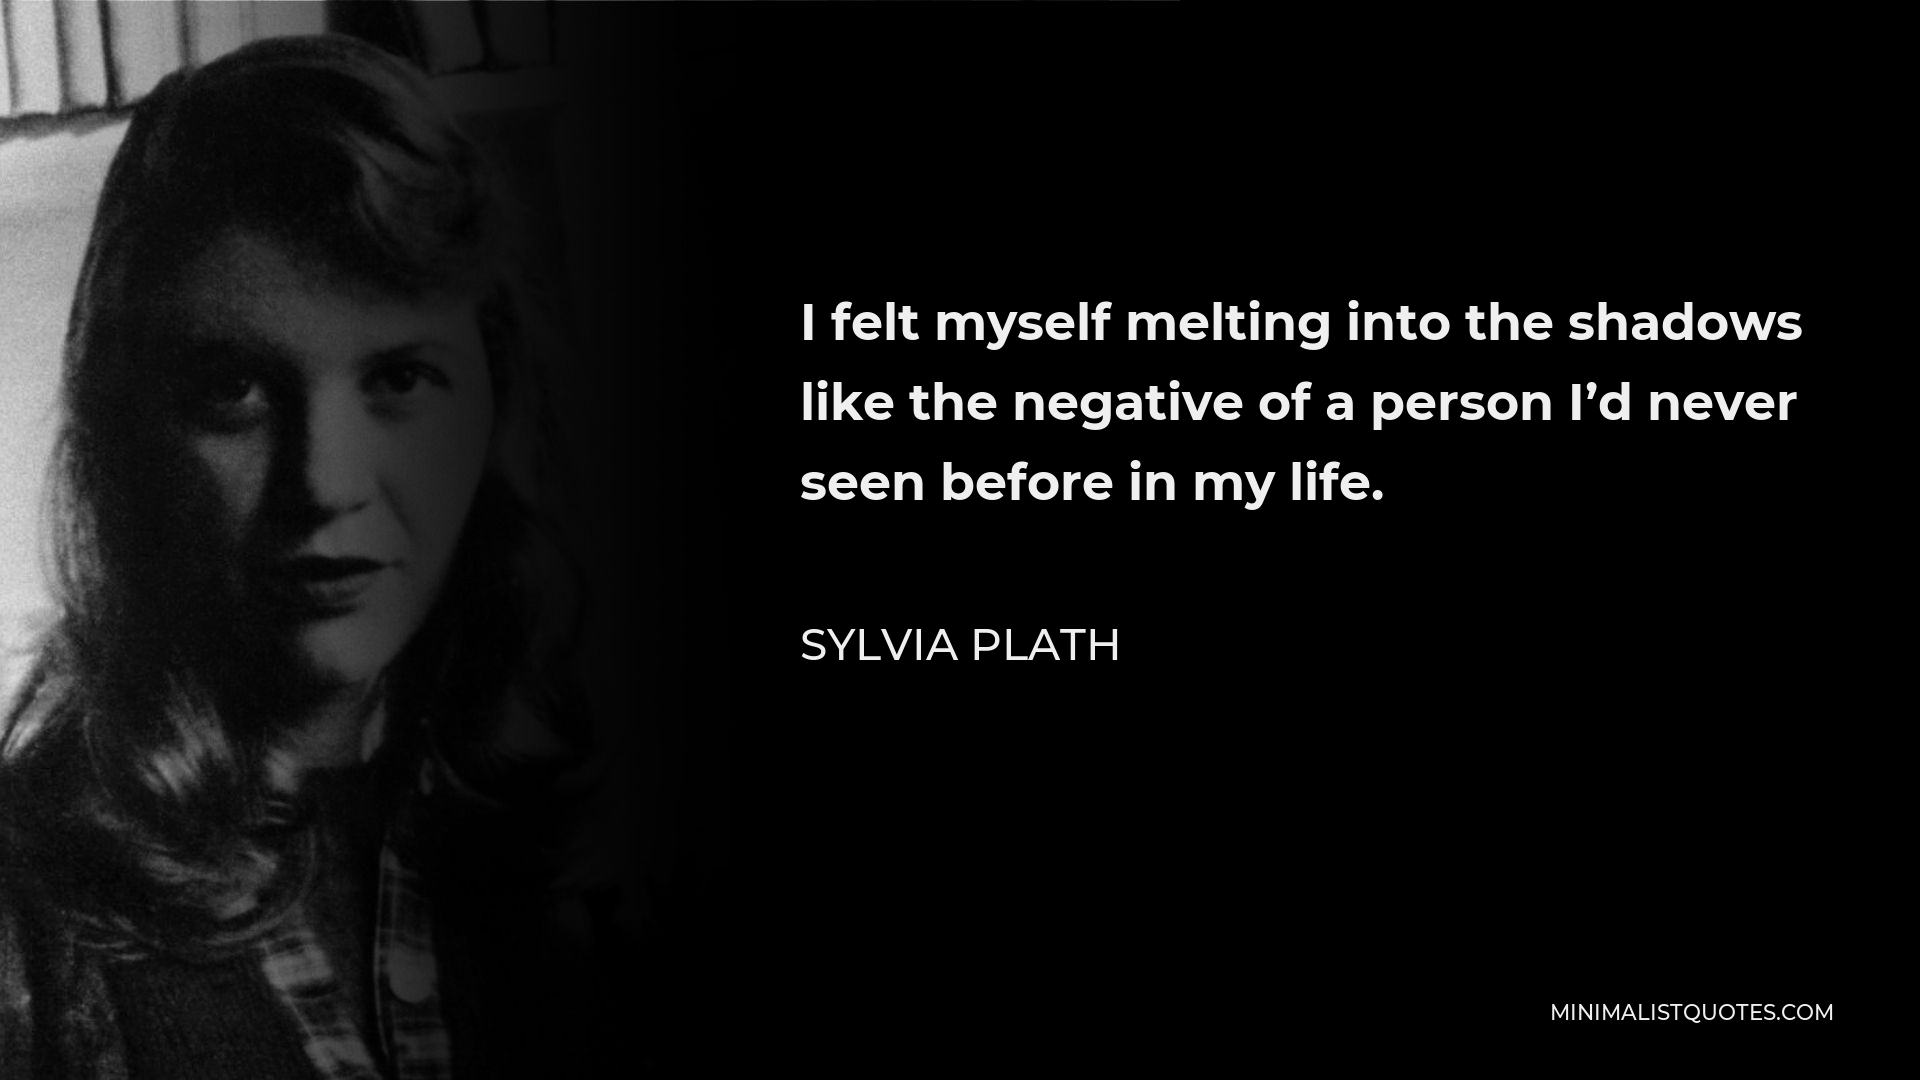 Sylvia Plath Quote - I felt myself melting into the shadows like the negative of a person I’d never seen before in my life.